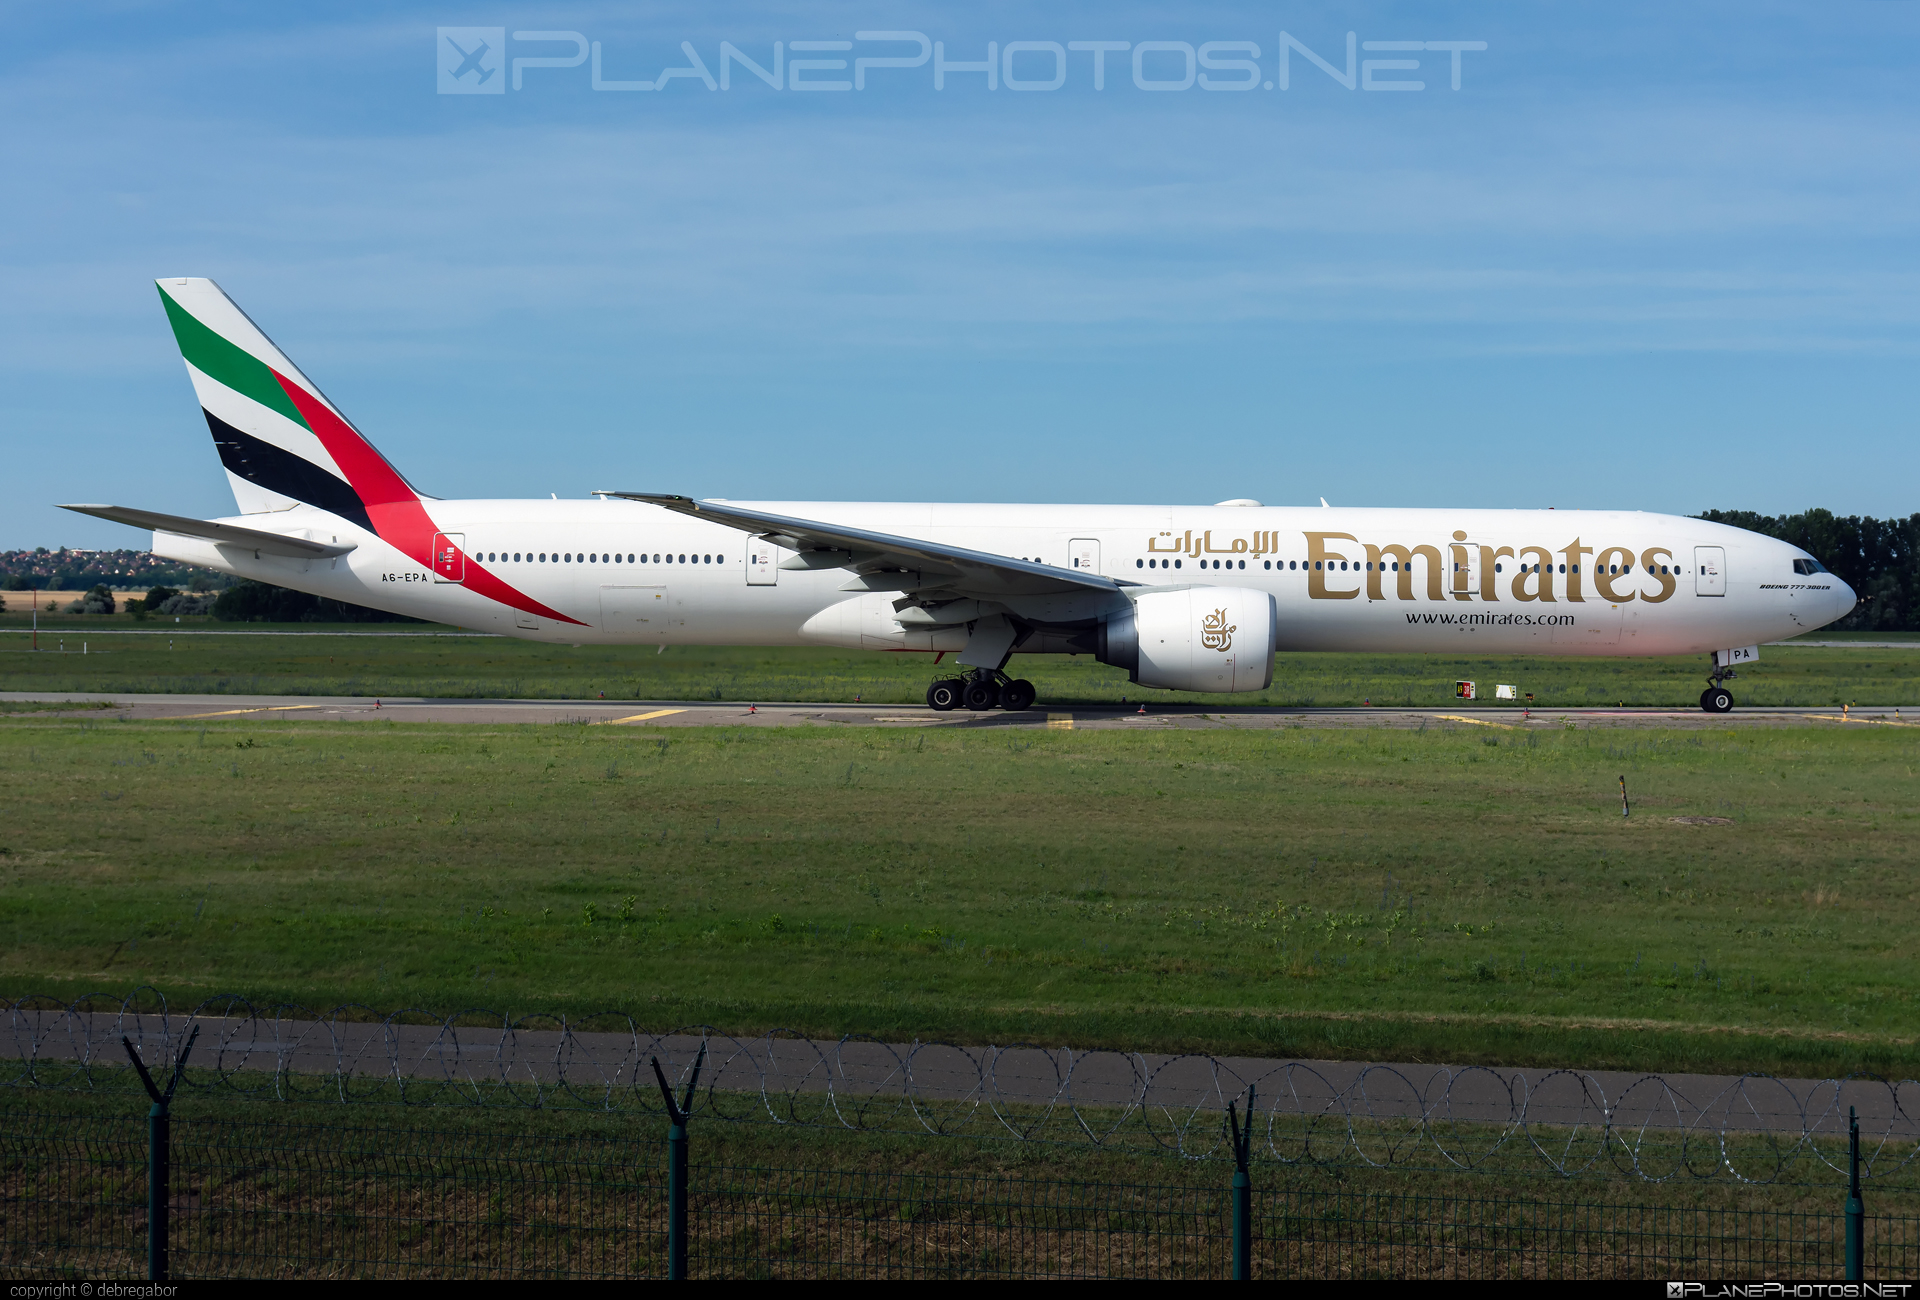 Boeing 777-300ER - A6-EPA operated by Emirates #b777 #b777er #boeing #boeing777 #emirates #tripleseven